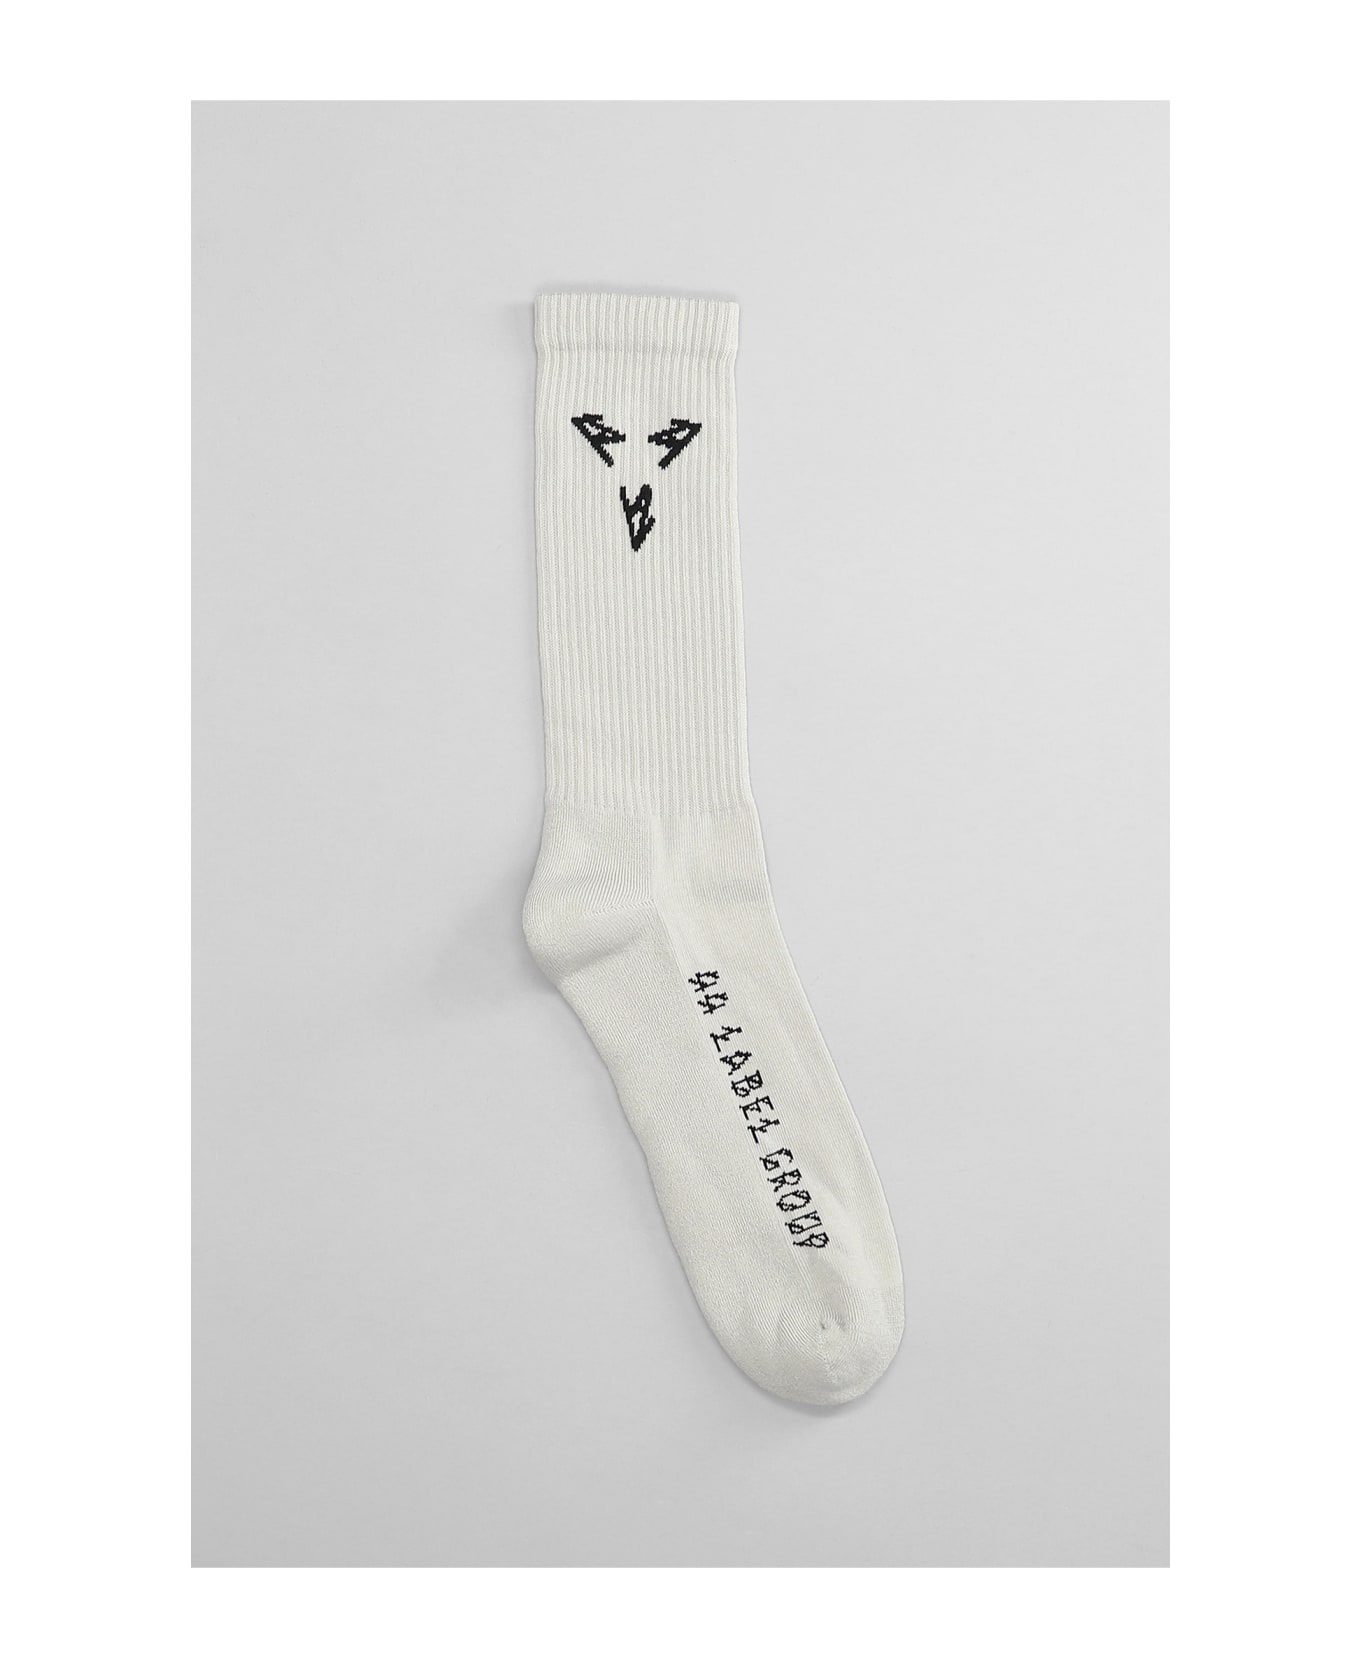 44 Label Group Socks In Grey Cotton - White